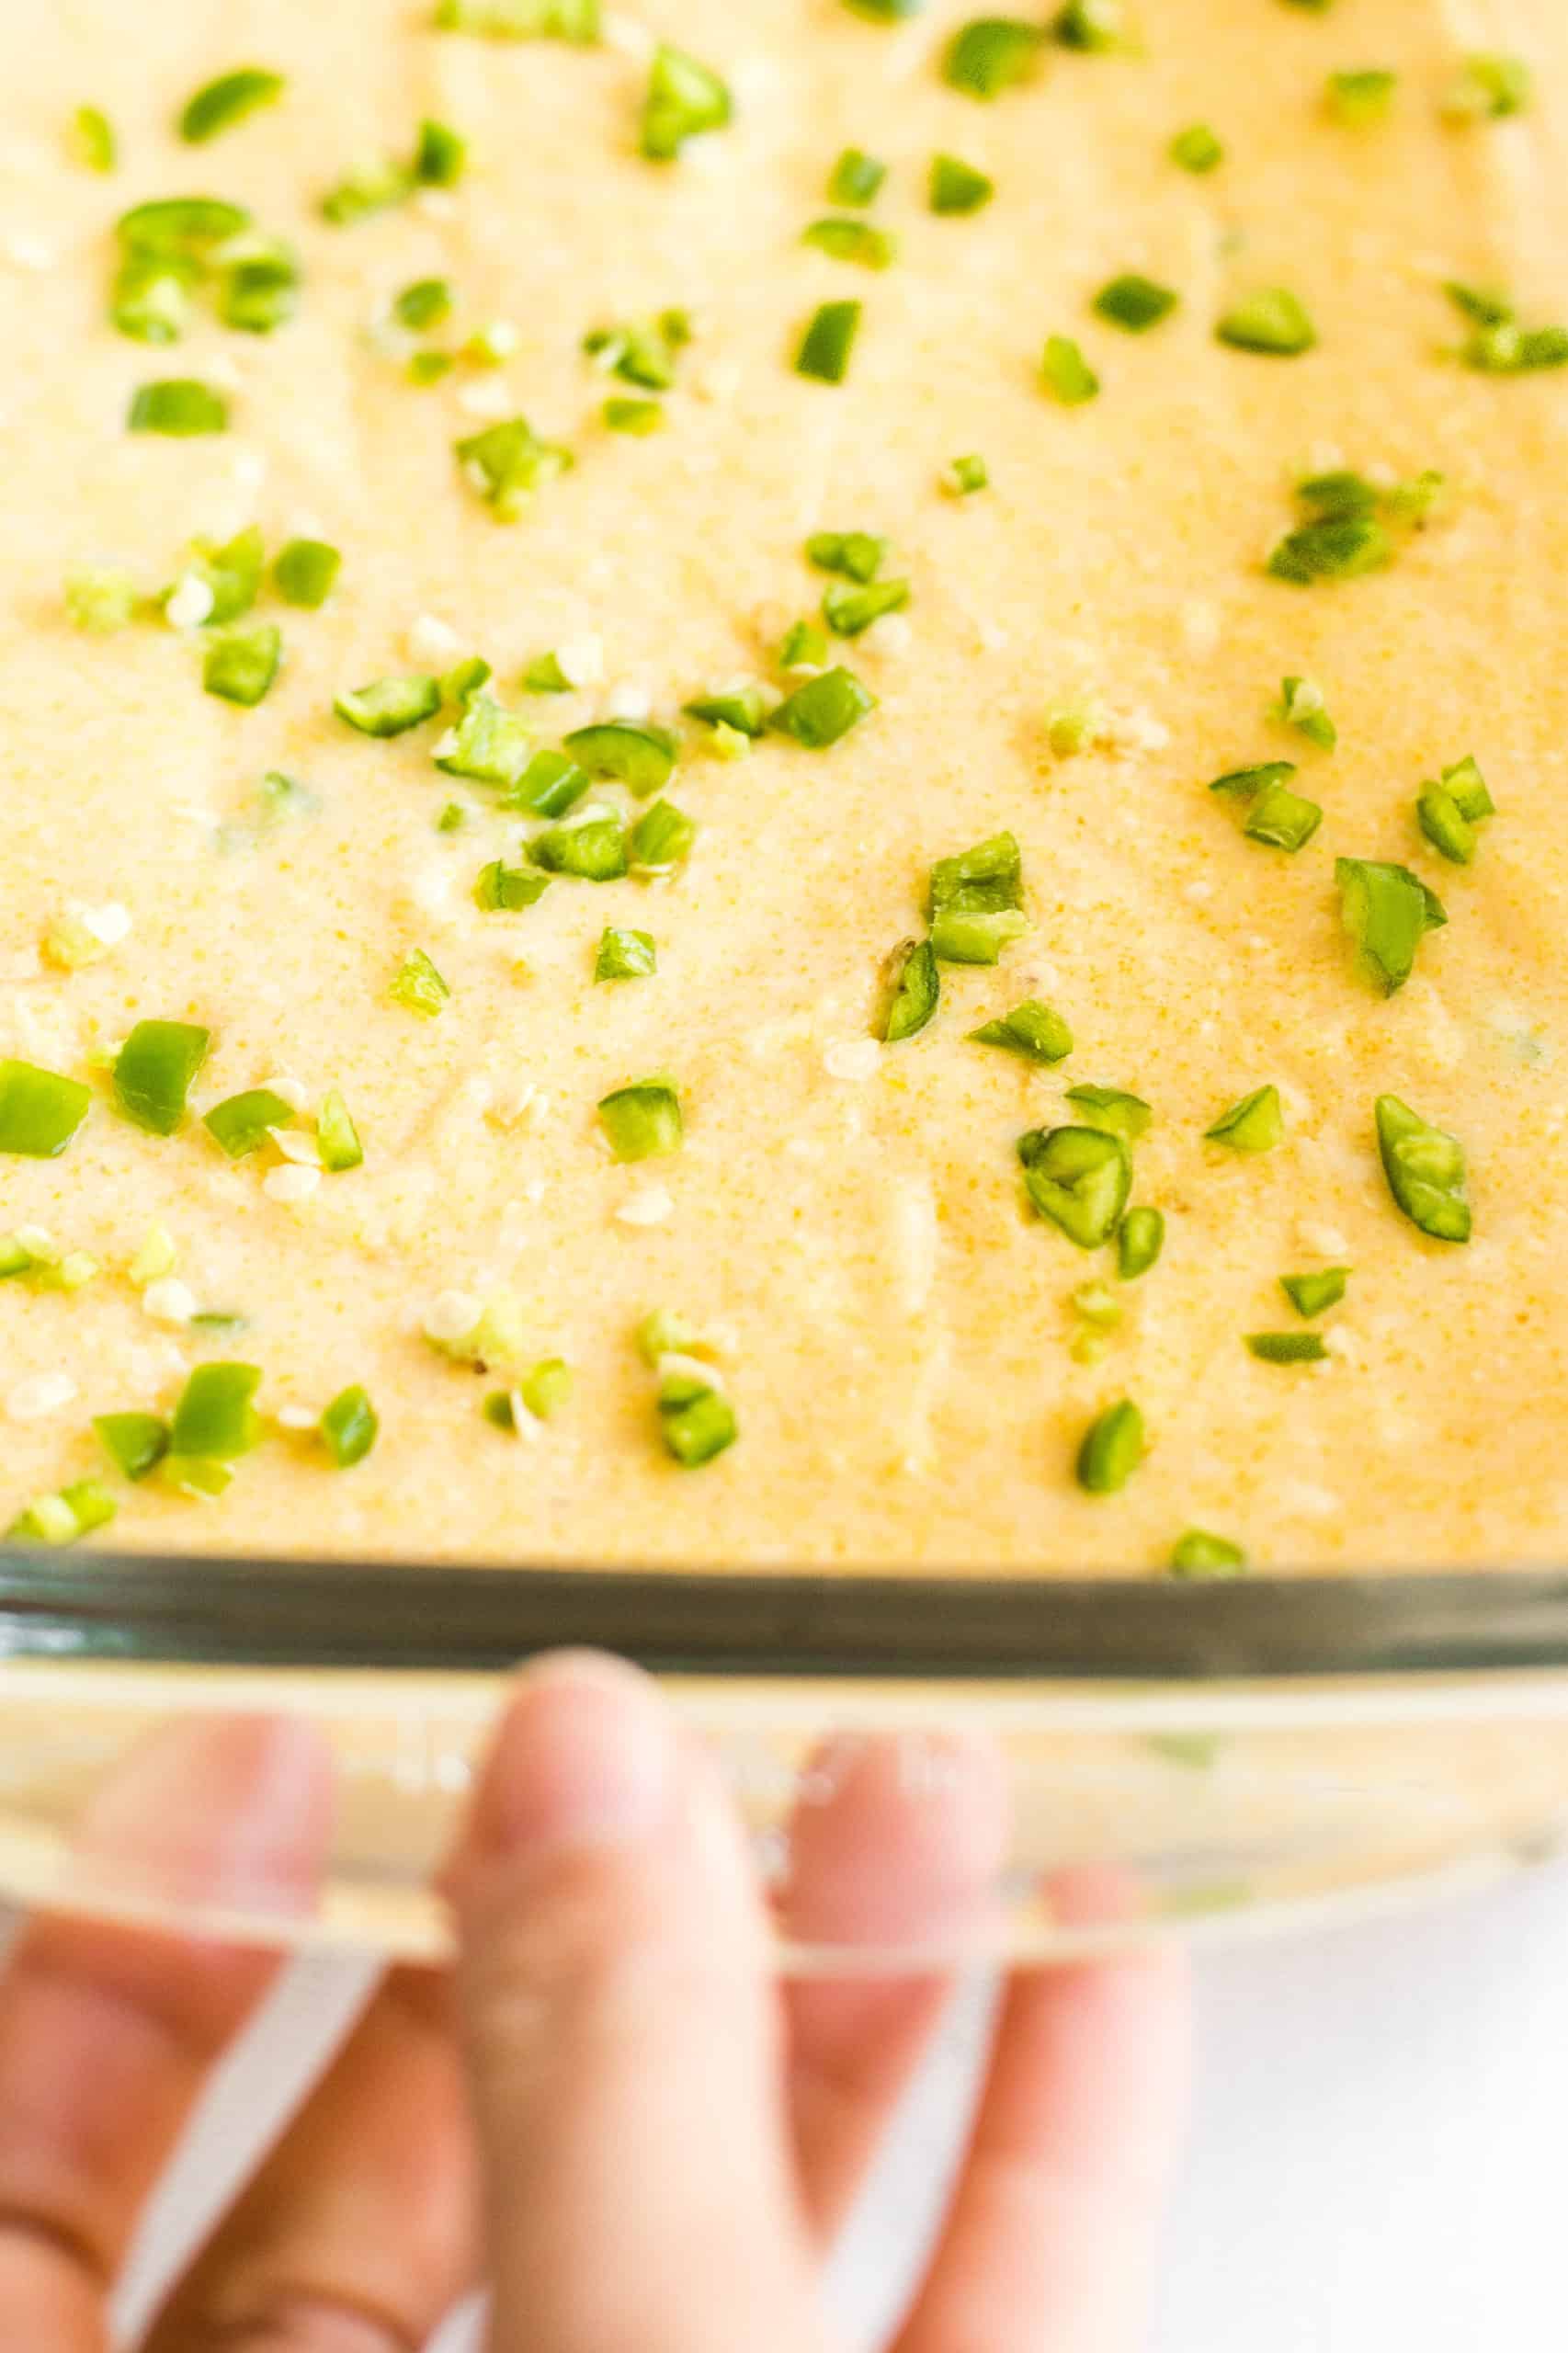 Hand holding a glass baking dish with gluten-free jalapeño cornbread batter ready to be baked.